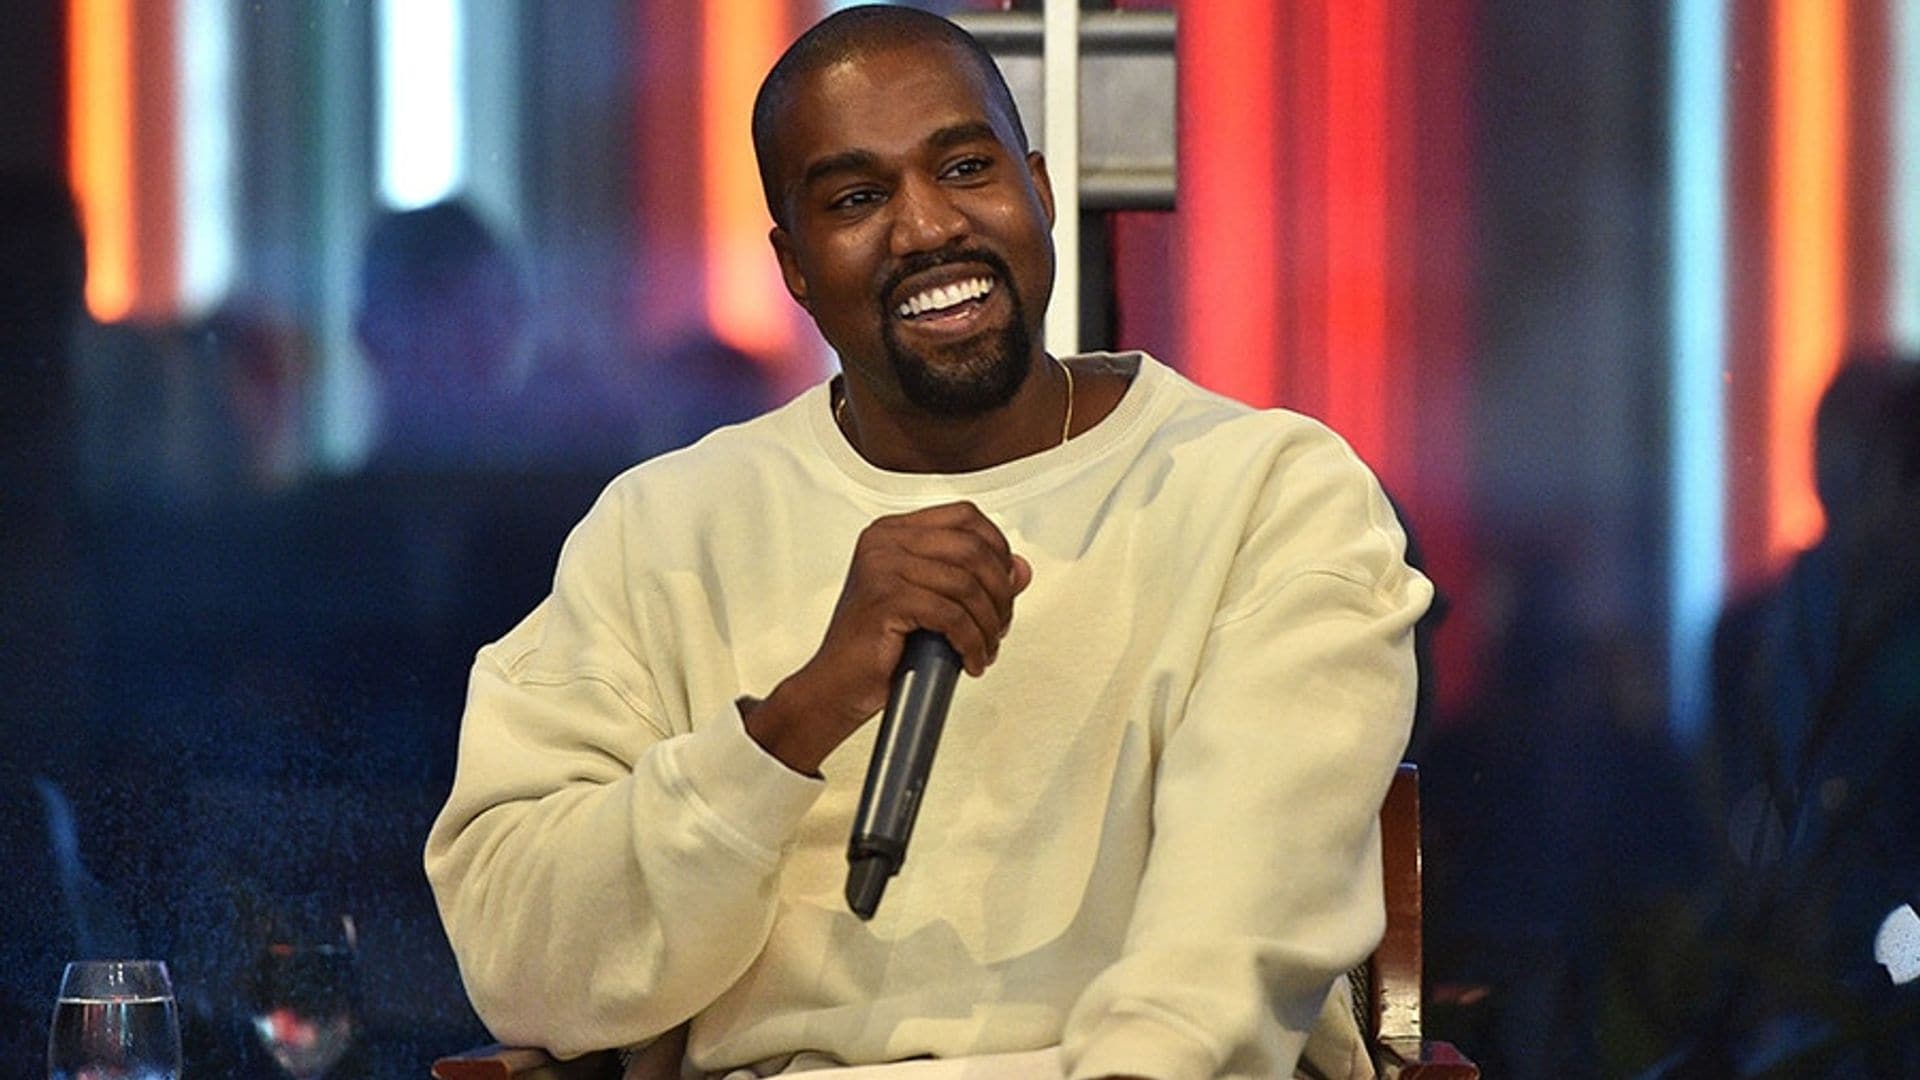 Kanye West announces he will run for president in 2020, celebs react